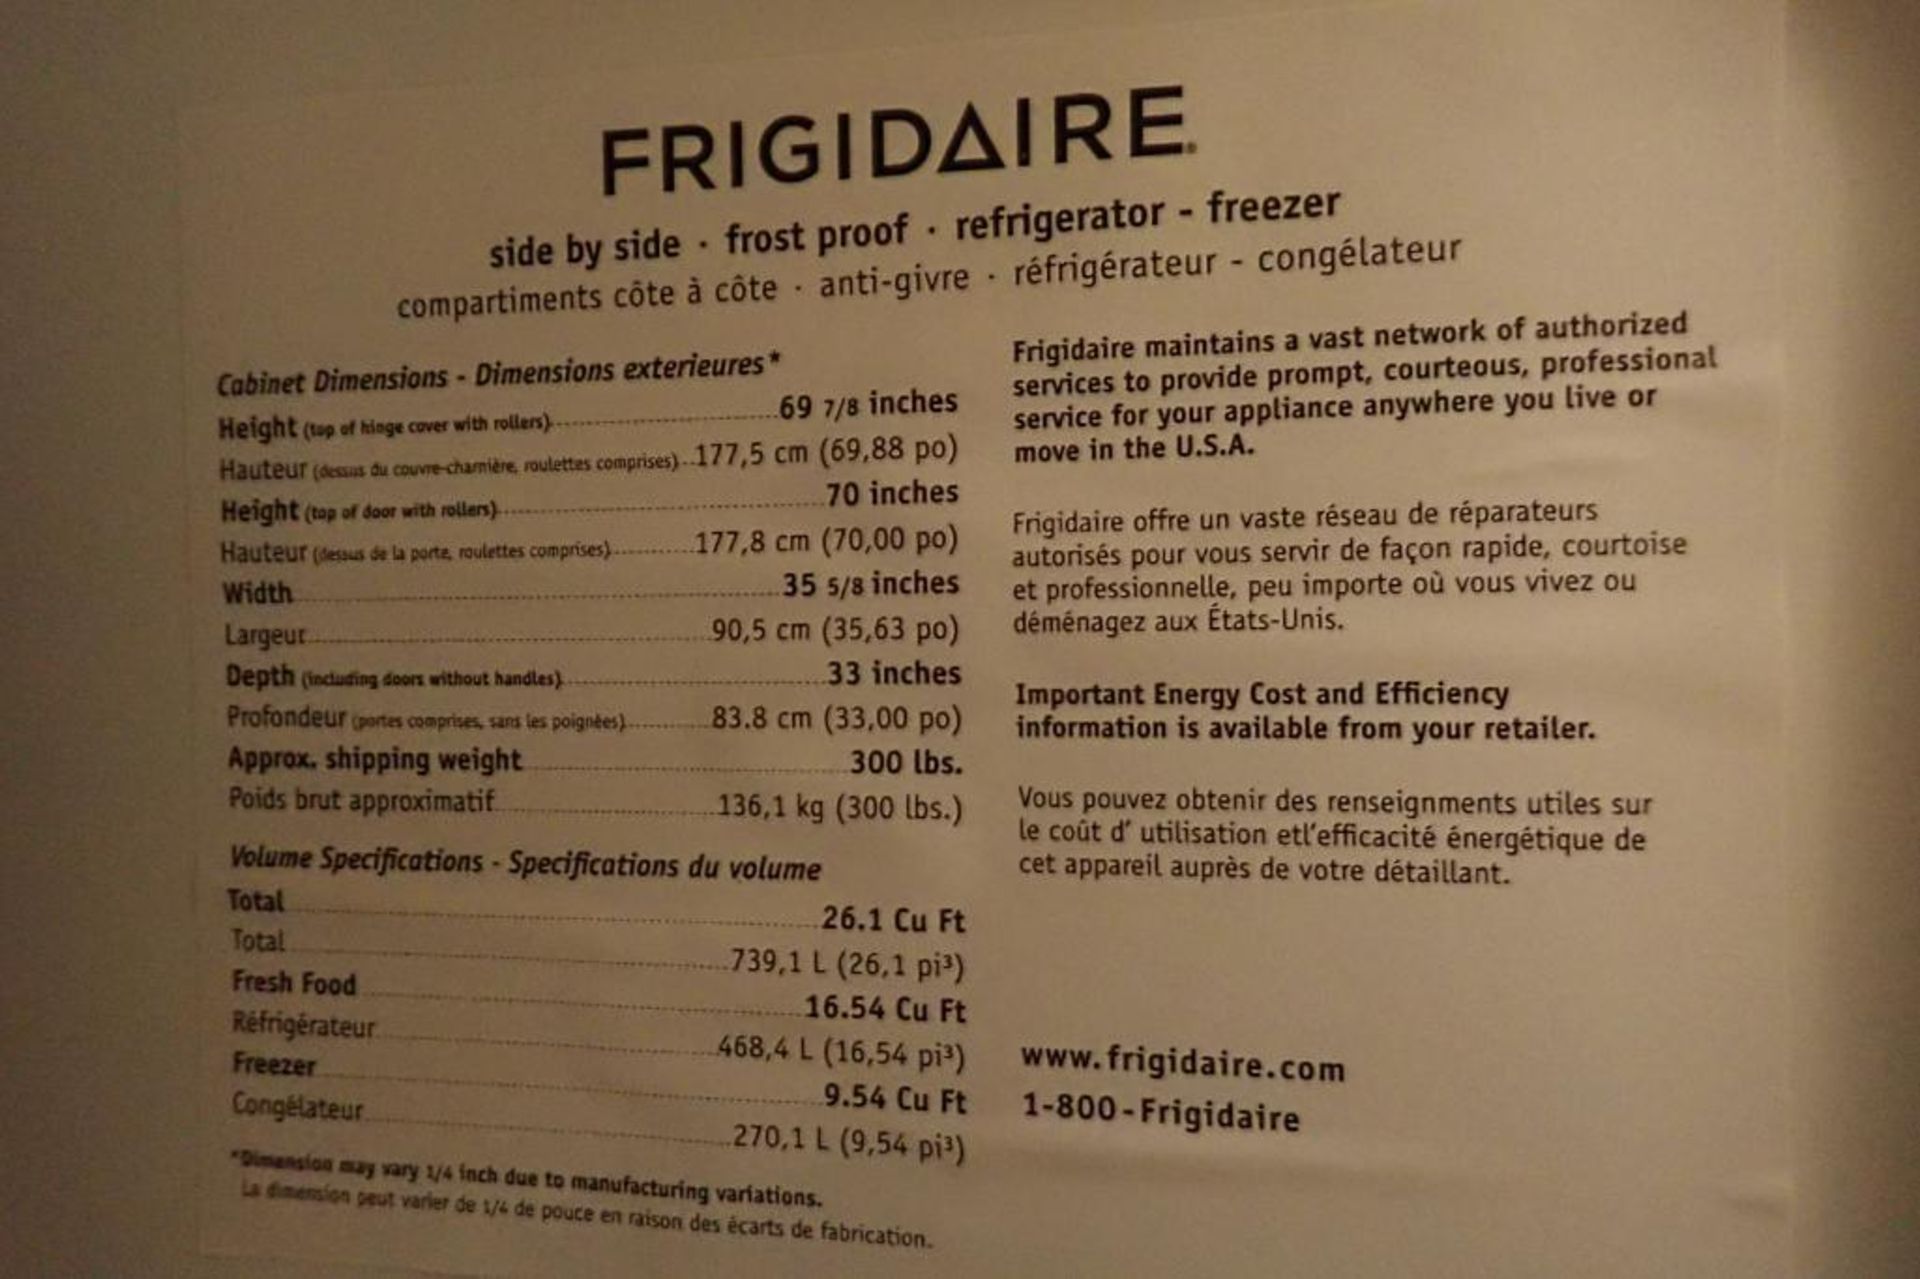 Frigidaire SS side by side refrigerator and freezer combo - Image 4 of 10